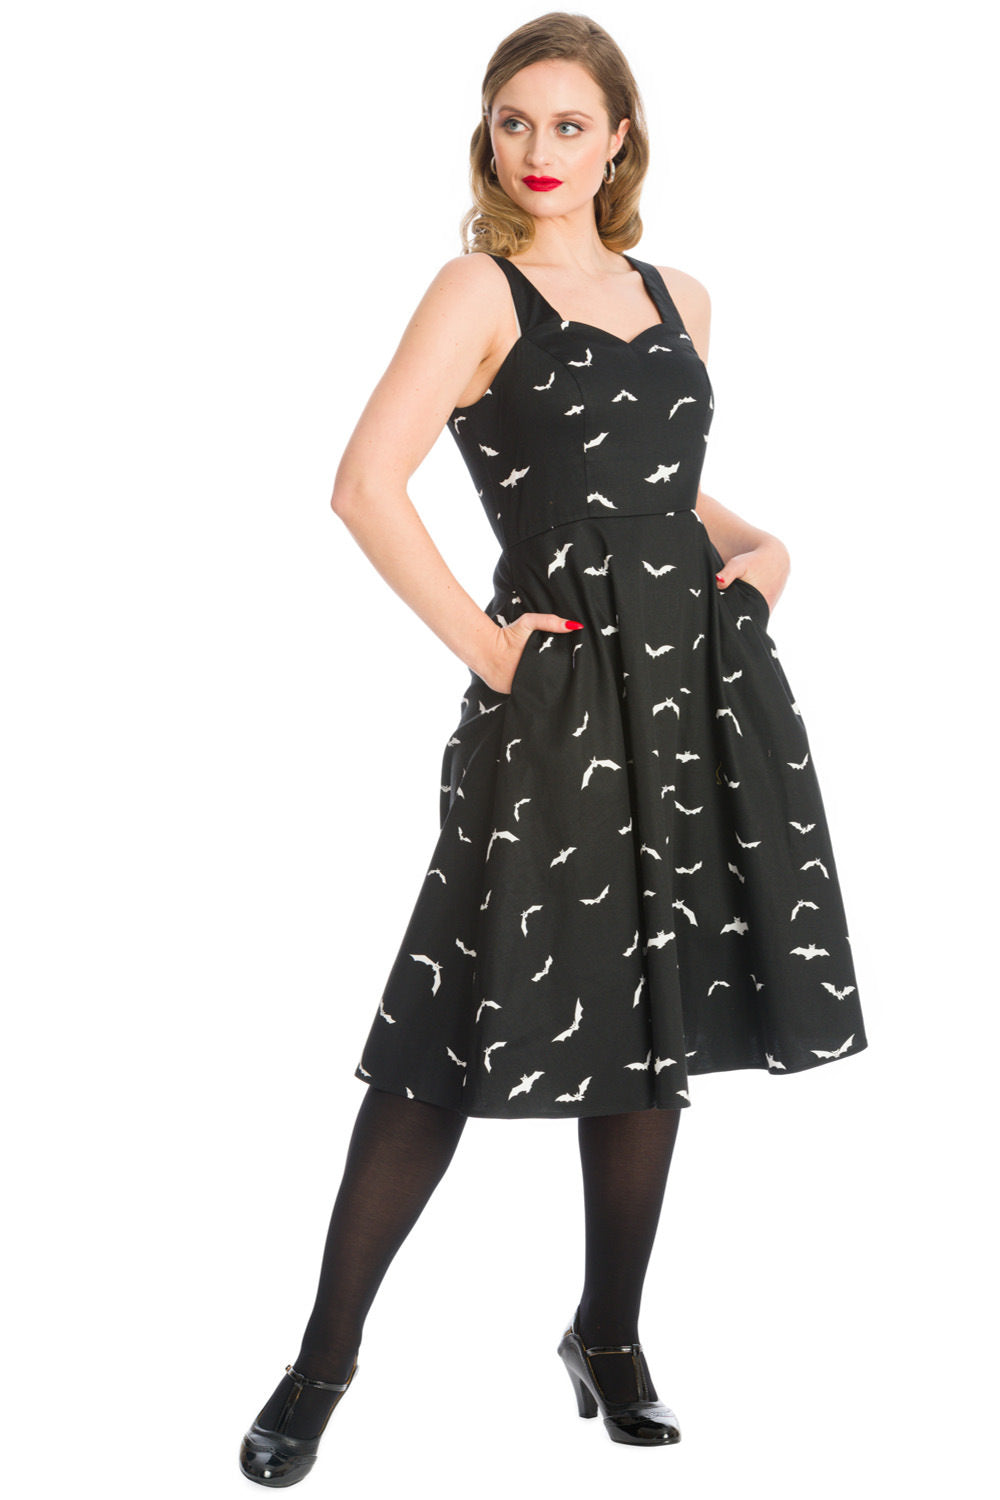 Blonde woman standing gracefully in a stylish black swing dress adorned with a captivating all-over white bat print and her hands in the side pockets